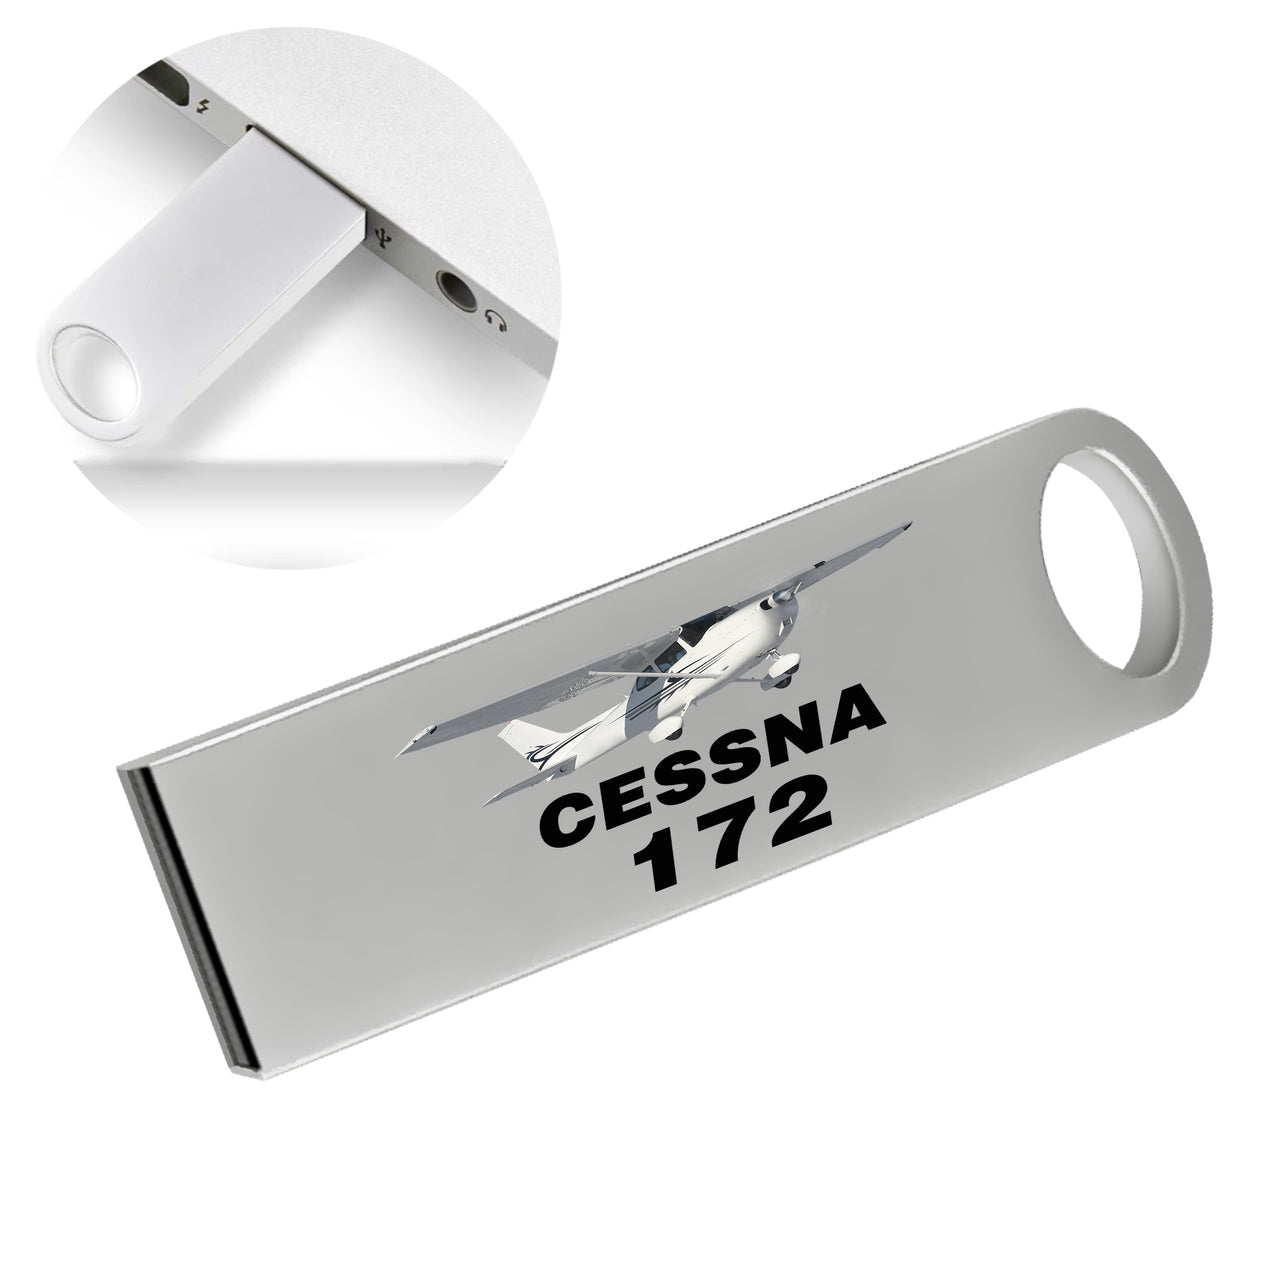 The Cessna 172 Designed Waterproof USB Devices